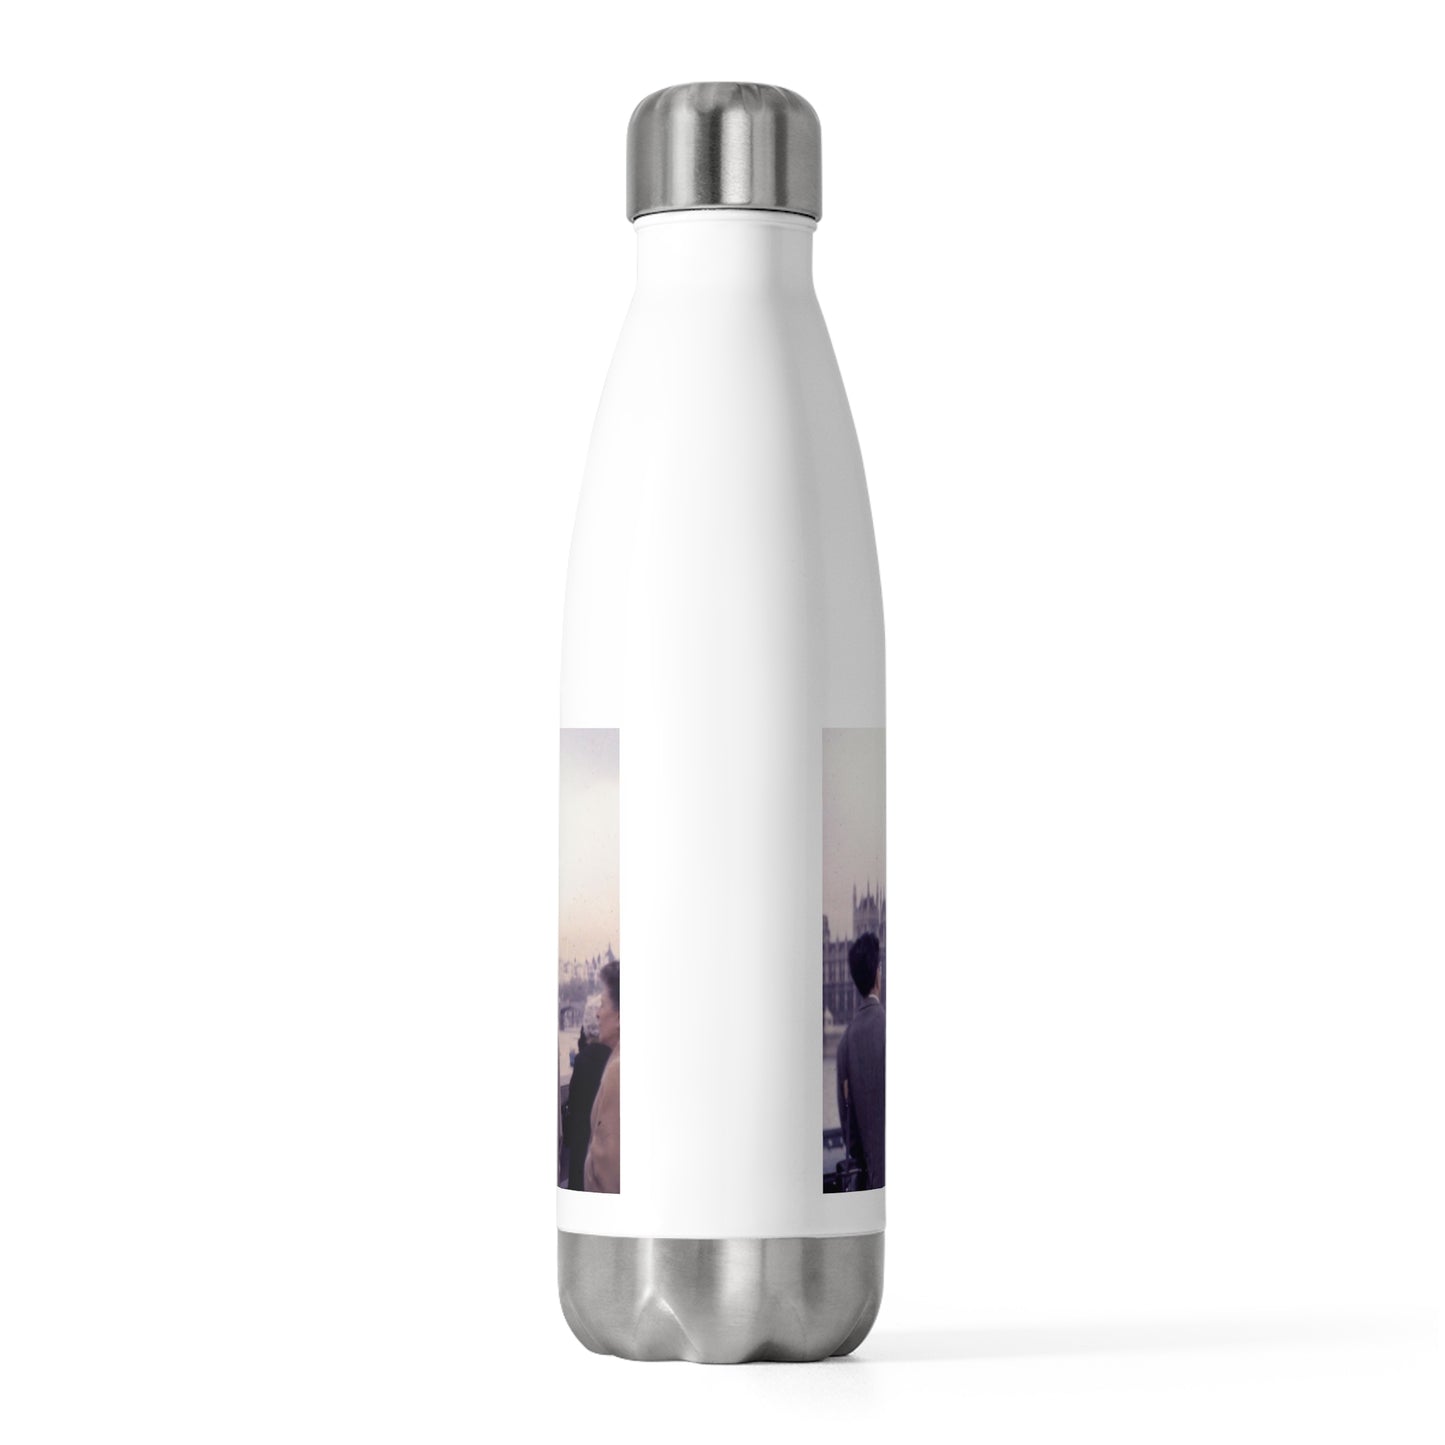 Europe 1967 No 3 20oz Insulated Bottle